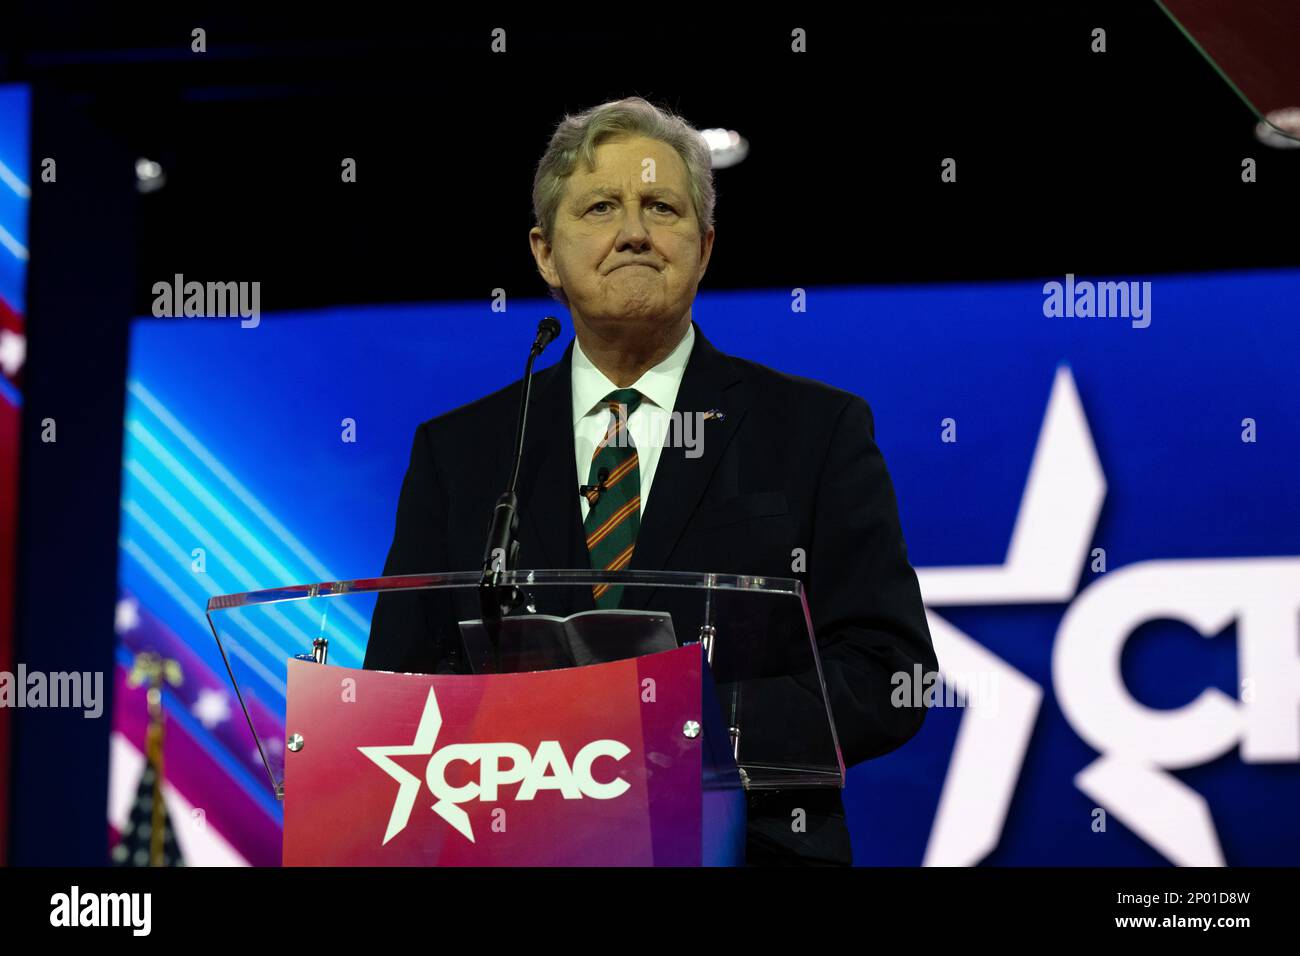 National Harbor Maryland Usa 2nd Mar 2023 United States Senator John Neely Kennedy Republican Of Louisiana At The 2023 Conservative Political Action Conference Cpac In National Harbor Maryland Us On Thursday March 2 2023 Credit Ron Sachscnpdpaalamy Live News 2P01D8W 